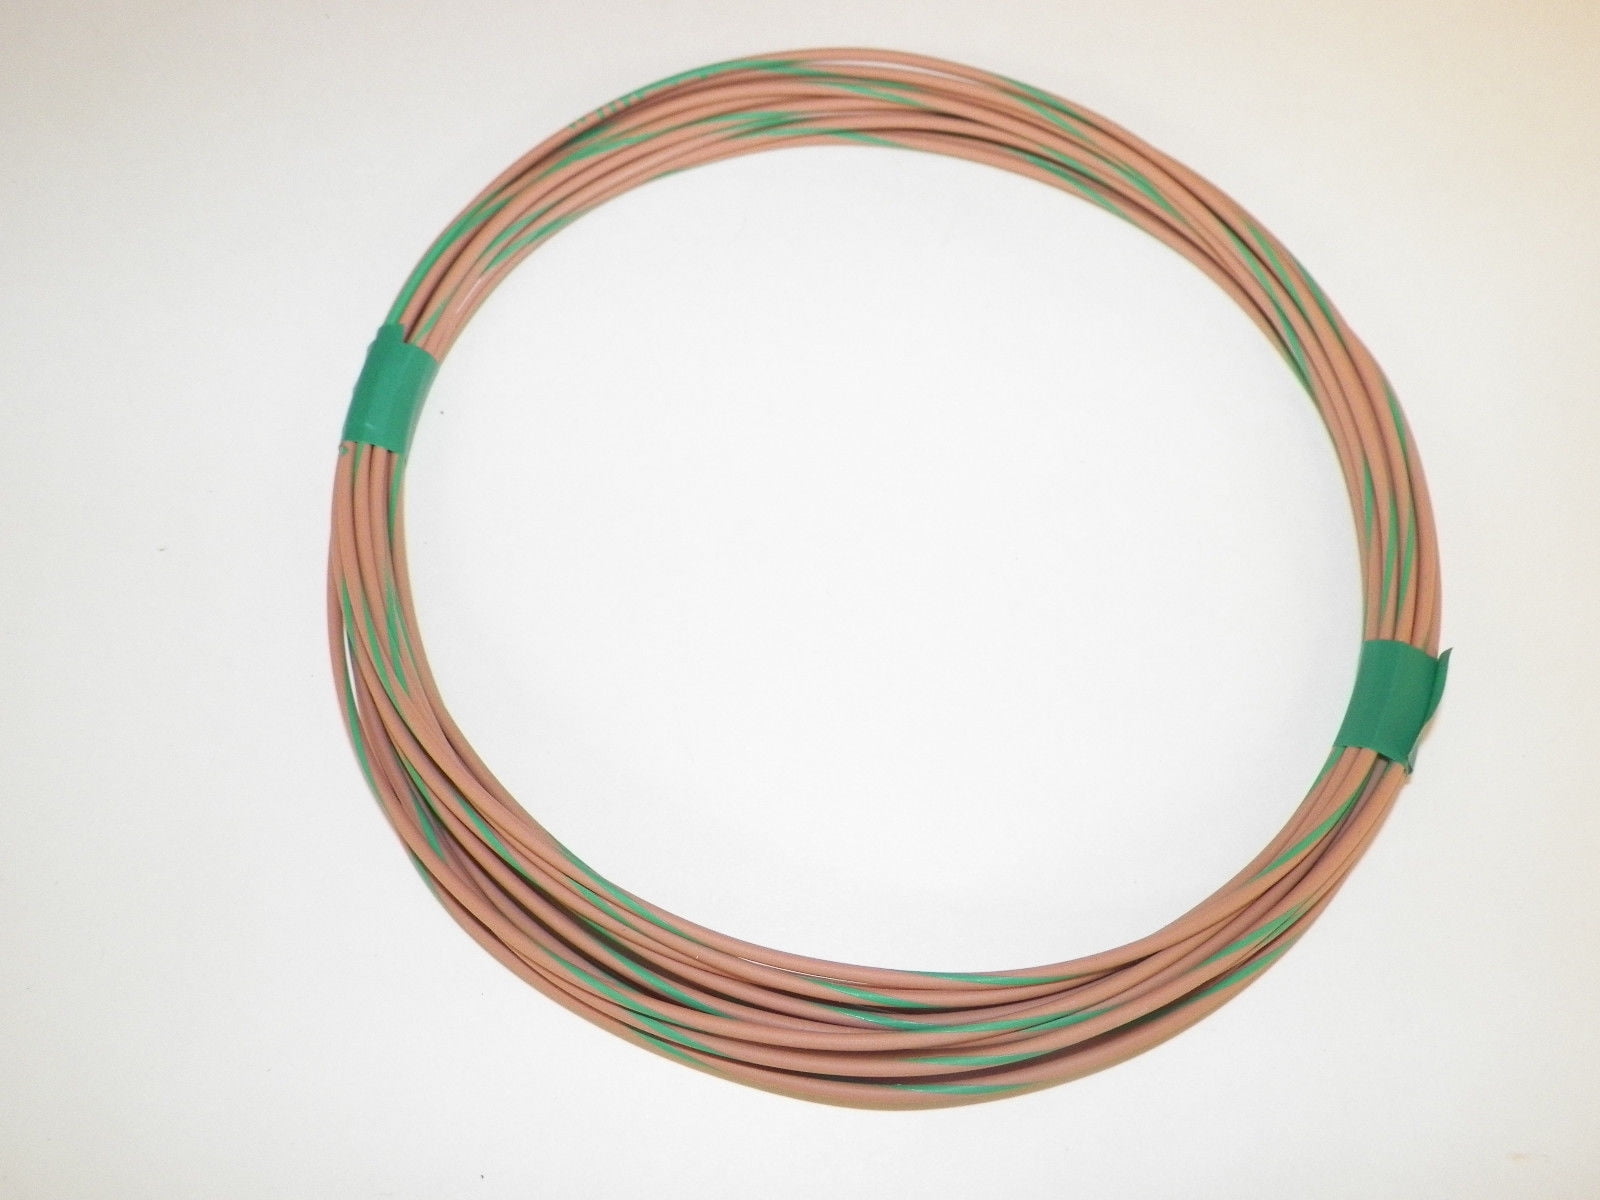 GREEN AUTOMOTIVE  WIRE 18 GAUGE HIGH TEMP GXL  25 FEET STRIPED AVAILABLE